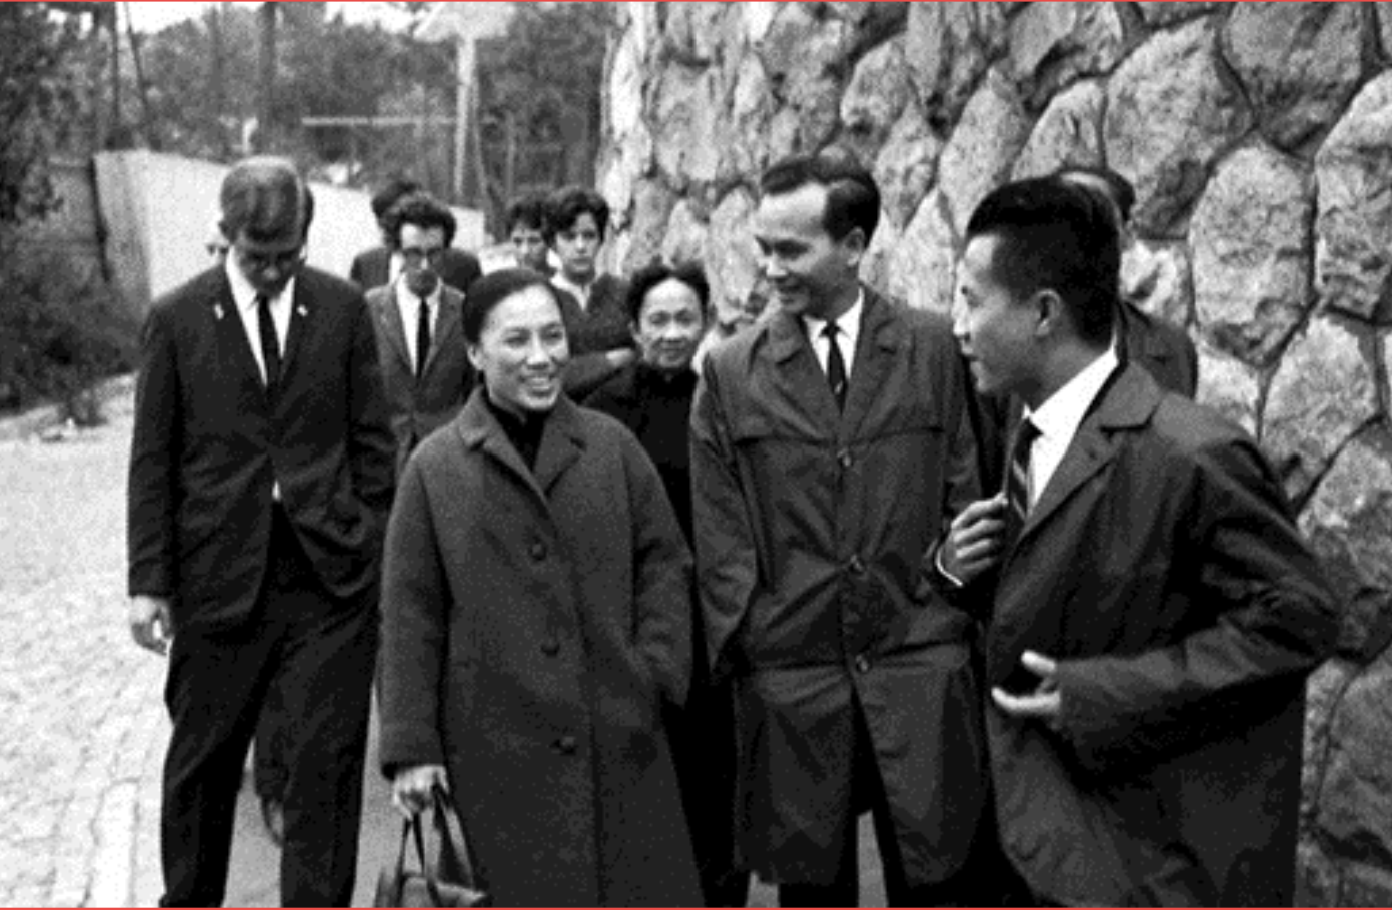 Nguyễn Thị Bình , one of the few women politicians surrounded by a pack of other politicians in a street